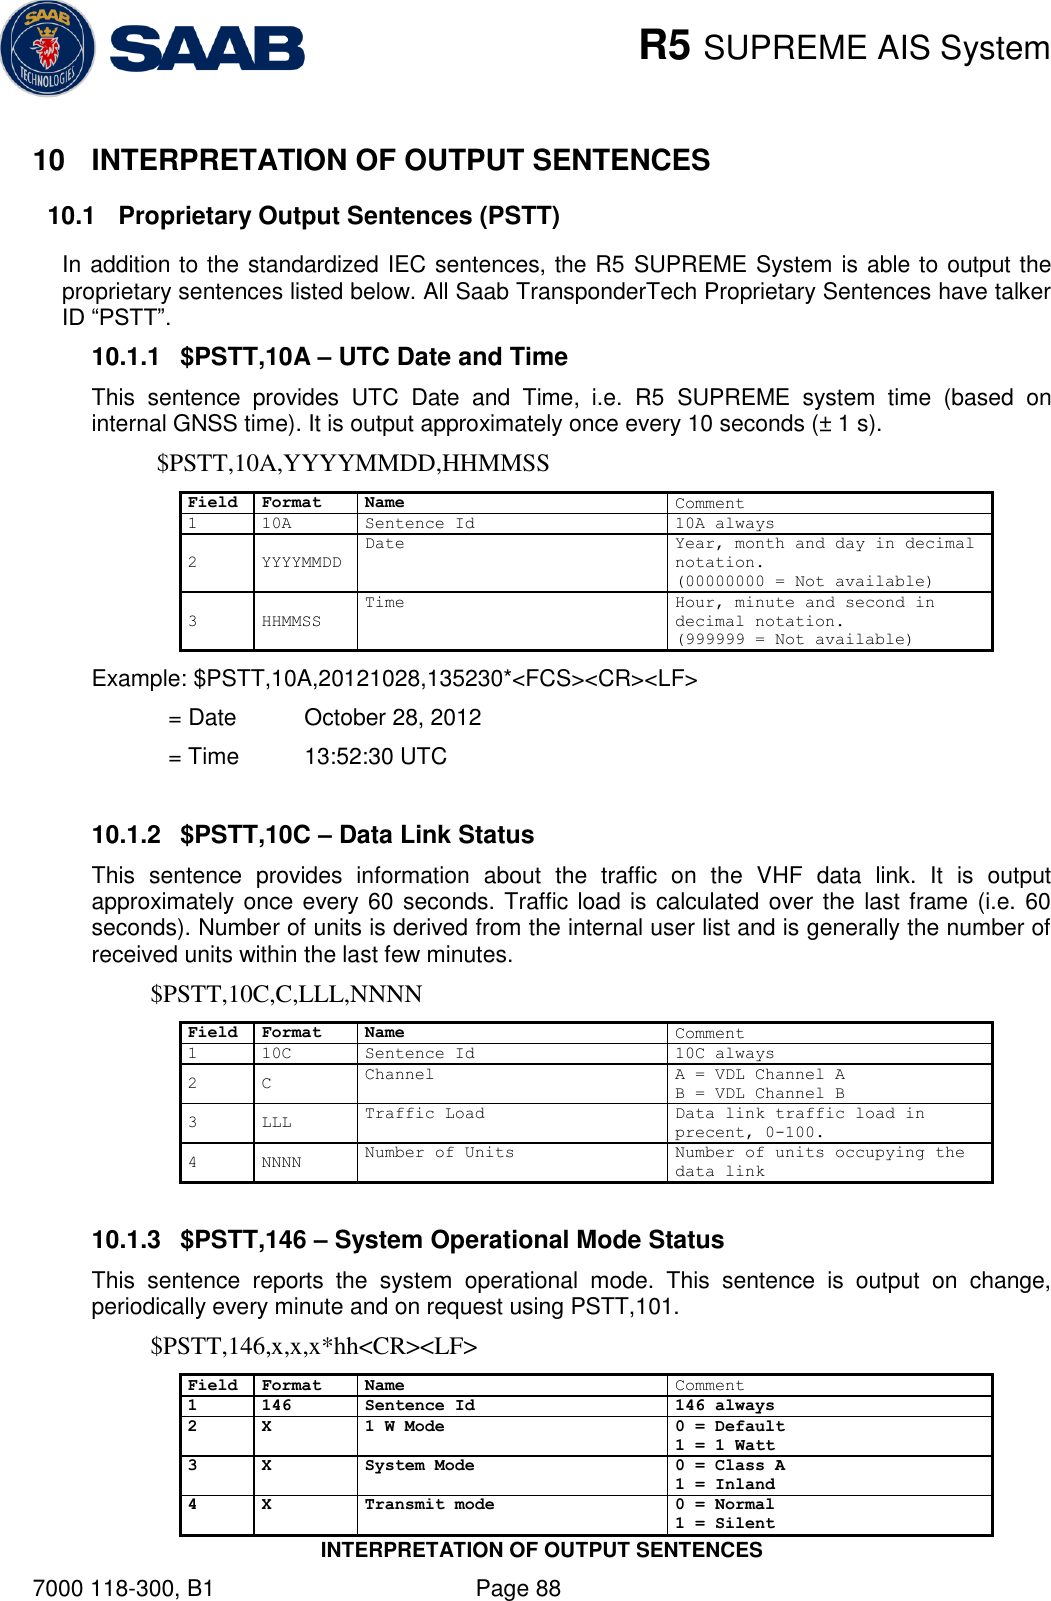    R5 SUPREME AIS System INTERPRETATION OF OUTPUT SENTENCES 7000 118-300, B1    Page 88 10  INTERPRETATION OF OUTPUT SENTENCES 10.1  Proprietary Output Sentences (PSTT) In addition to the standardized IEC sentences, the R5 SUPREME System is able to output the proprietary sentences listed below. All Saab TransponderTech Proprietary Sentences have talker ID “PSTT”. 10.1.1  $PSTT,10A – UTC Date and Time This  sentence  provides  UTC  Date  and  Time,  i.e.  R5  SUPREME  system  time  (based  on internal GNSS time). It is output approximately once every 10 seconds (± 1 s).  $PSTT,10A,YYYYMMDD,HHMMSS Field Format Name Comment 1 10A Sentence Id 10A always 2 YYYYMMDD Date Year, month and day in decimal notation.  (00000000 = Not available) 3 HHMMSS Time Hour, minute and second in decimal notation.  (999999 = Not available) Example: $PSTT,10A,20121028,135230*&lt;FCS&gt;&lt;CR&gt;&lt;LF&gt; = Date  October 28, 2012 = Time  13:52:30 UTC  10.1.2  $PSTT,10C – Data Link Status This  sentence  provides  information  about  the  traffic  on  the  VHF  data  link.  It  is  output approximately once every 60 seconds. Traffic load is calculated over the last frame (i.e. 60 seconds). Number of units is derived from the internal user list and is generally the number of received units within the last few minutes. $PSTT,10C,C,LLL,NNNN Field Format Name Comment 1 10C Sentence Id 10C always 2 C Channel A = VDL Channel A B = VDL Channel B 3 LLL Traffic Load Data link traffic load in precent, 0-100.  4 NNNN Number of Units Number of units occupying the data link  10.1.3  $PSTT,146 – System Operational Mode Status This  sentence  reports  the  system  operational  mode.  This  sentence  is  output  on  change, periodically every minute and on request using PSTT,101. $PSTT,146,x,x,x*hh&lt;CR&gt;&lt;LF&gt; Field Format Name Comment 1 146 Sentence Id 146 always 2 X 1 W Mode 0 = Default 1 = 1 Watt 3 X System Mode 0 = Class A 1 = Inland 4 X Transmit mode 0 = Normal 1 = Silent 